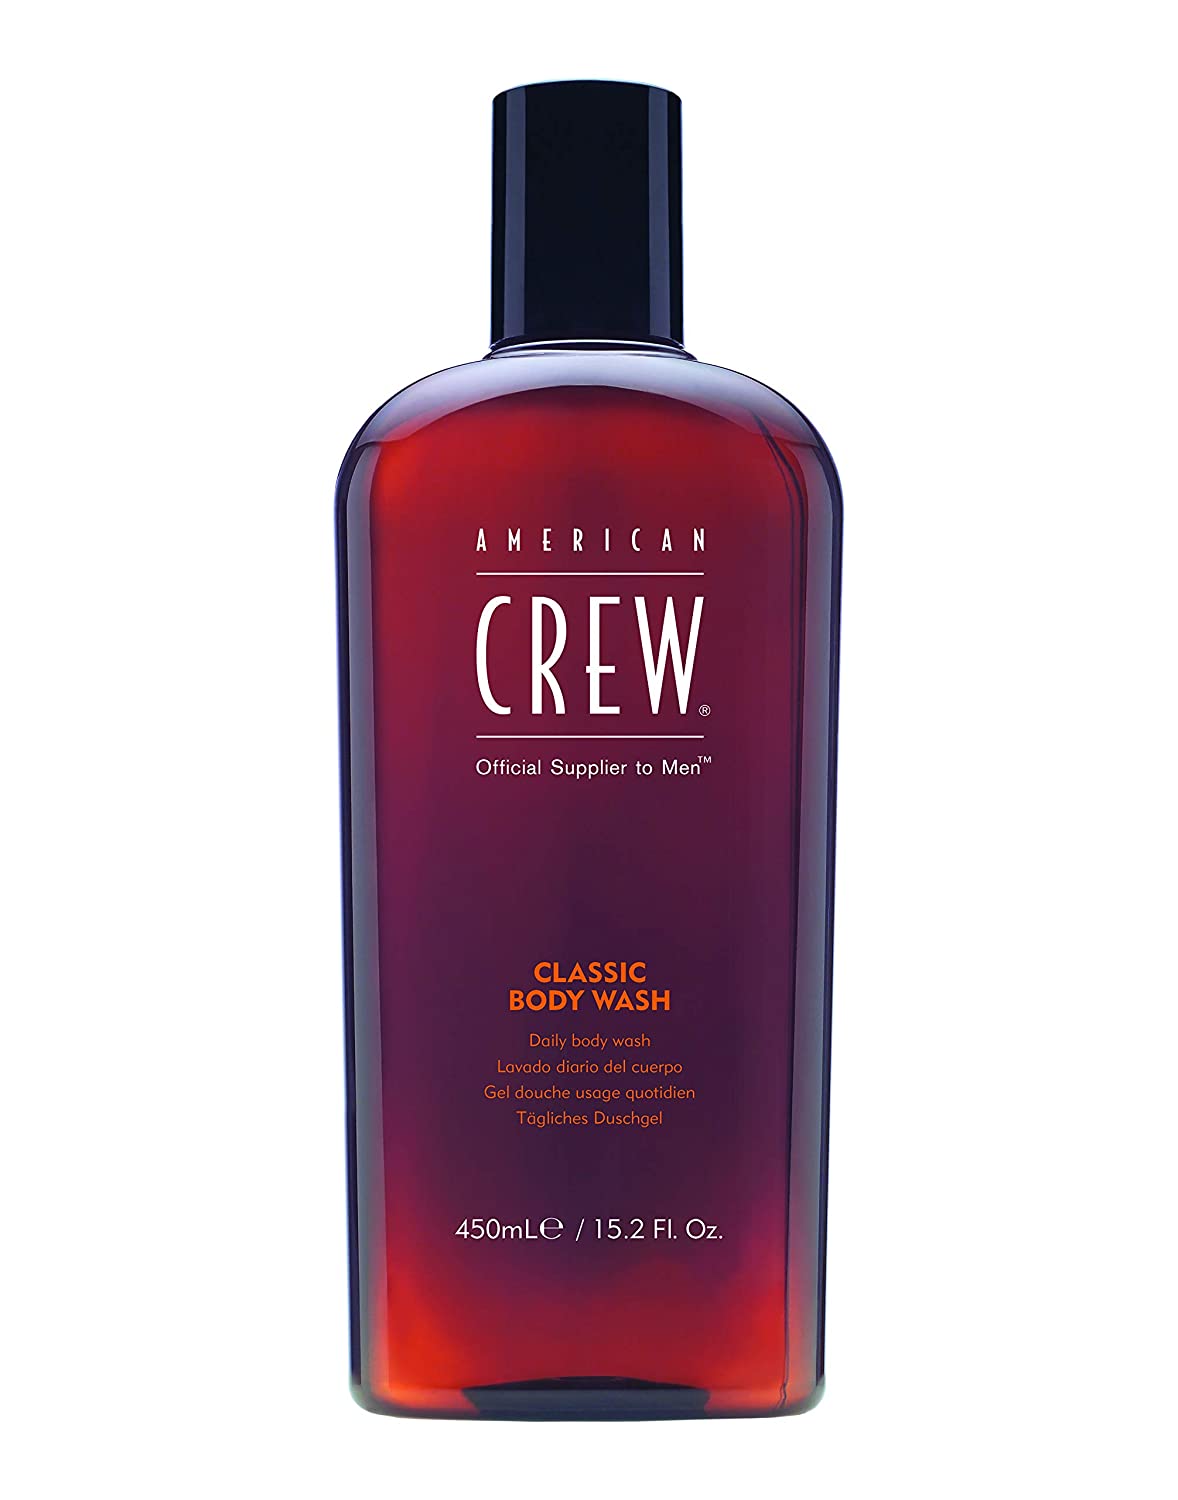 AMERICAN CREW Classic Body Wash, 450 ml, Shower Gel for Men, Care Product for Daily Cleaning, Vitamin A and E Moisturise and Nourish the Skin